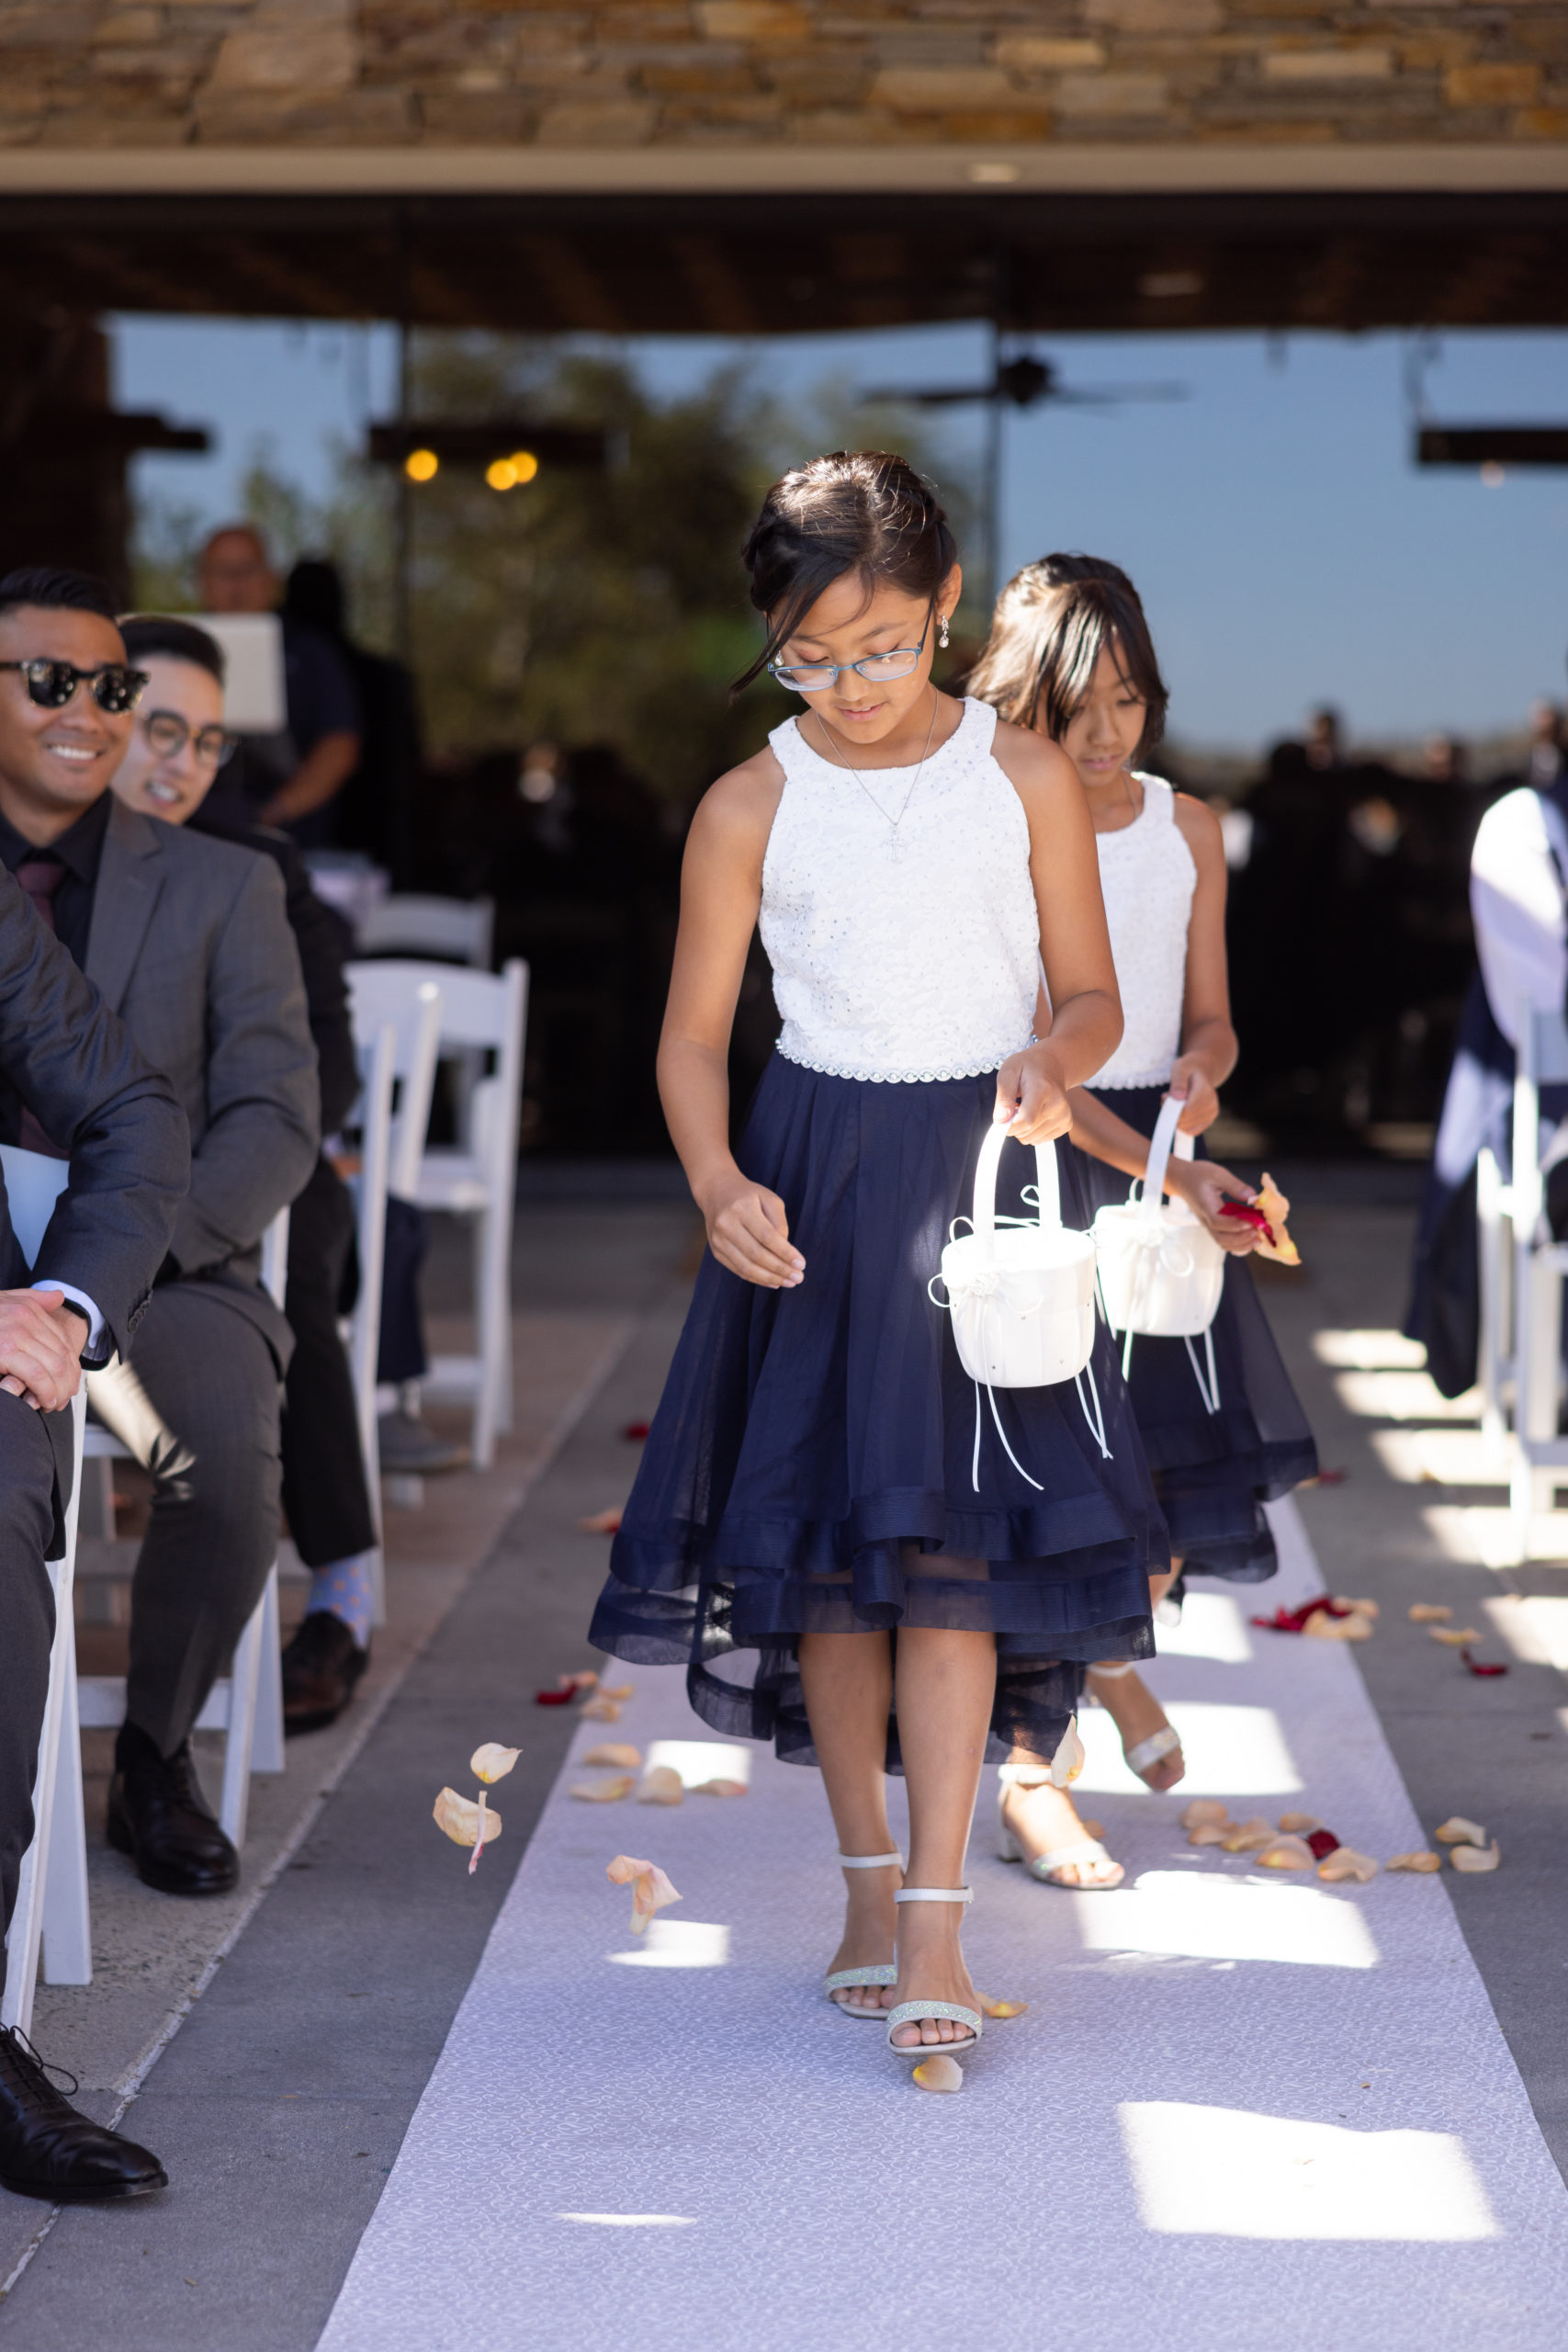 flower girls in white and navy dresses walking down the aisle 